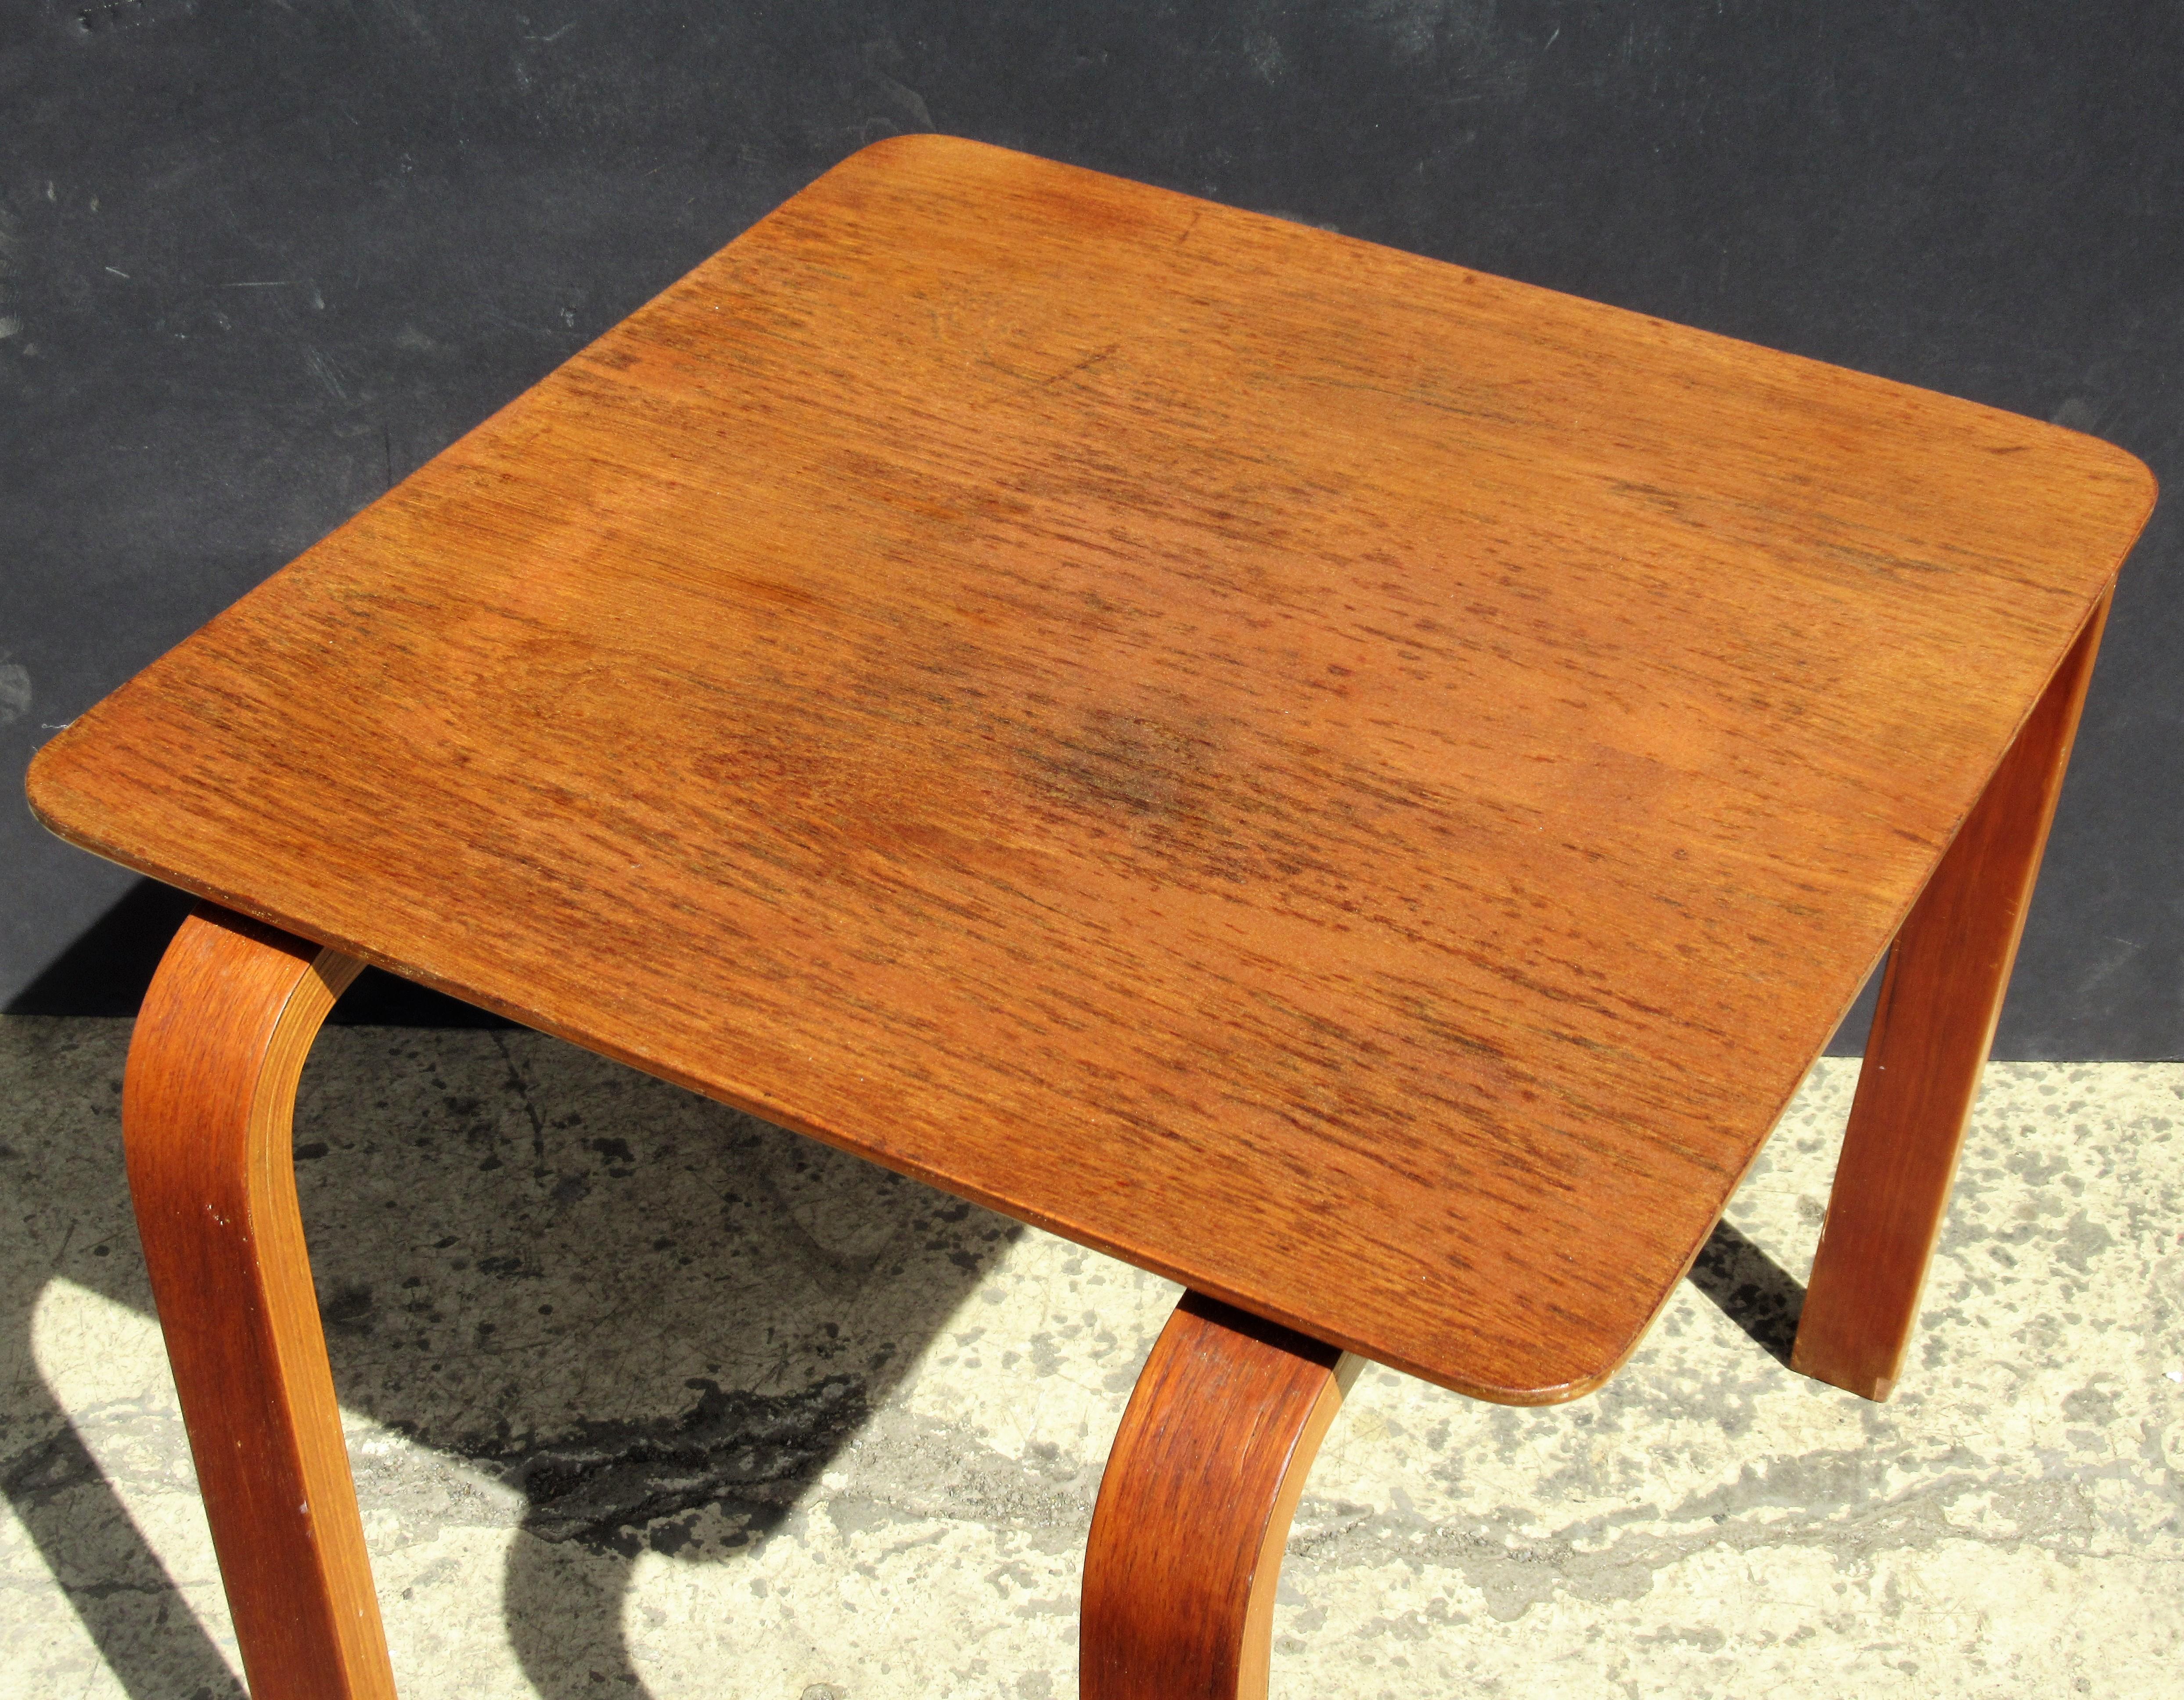 20th Century Bent Plywood and Teak Occasional Side Table - Made in Denmark - 1950